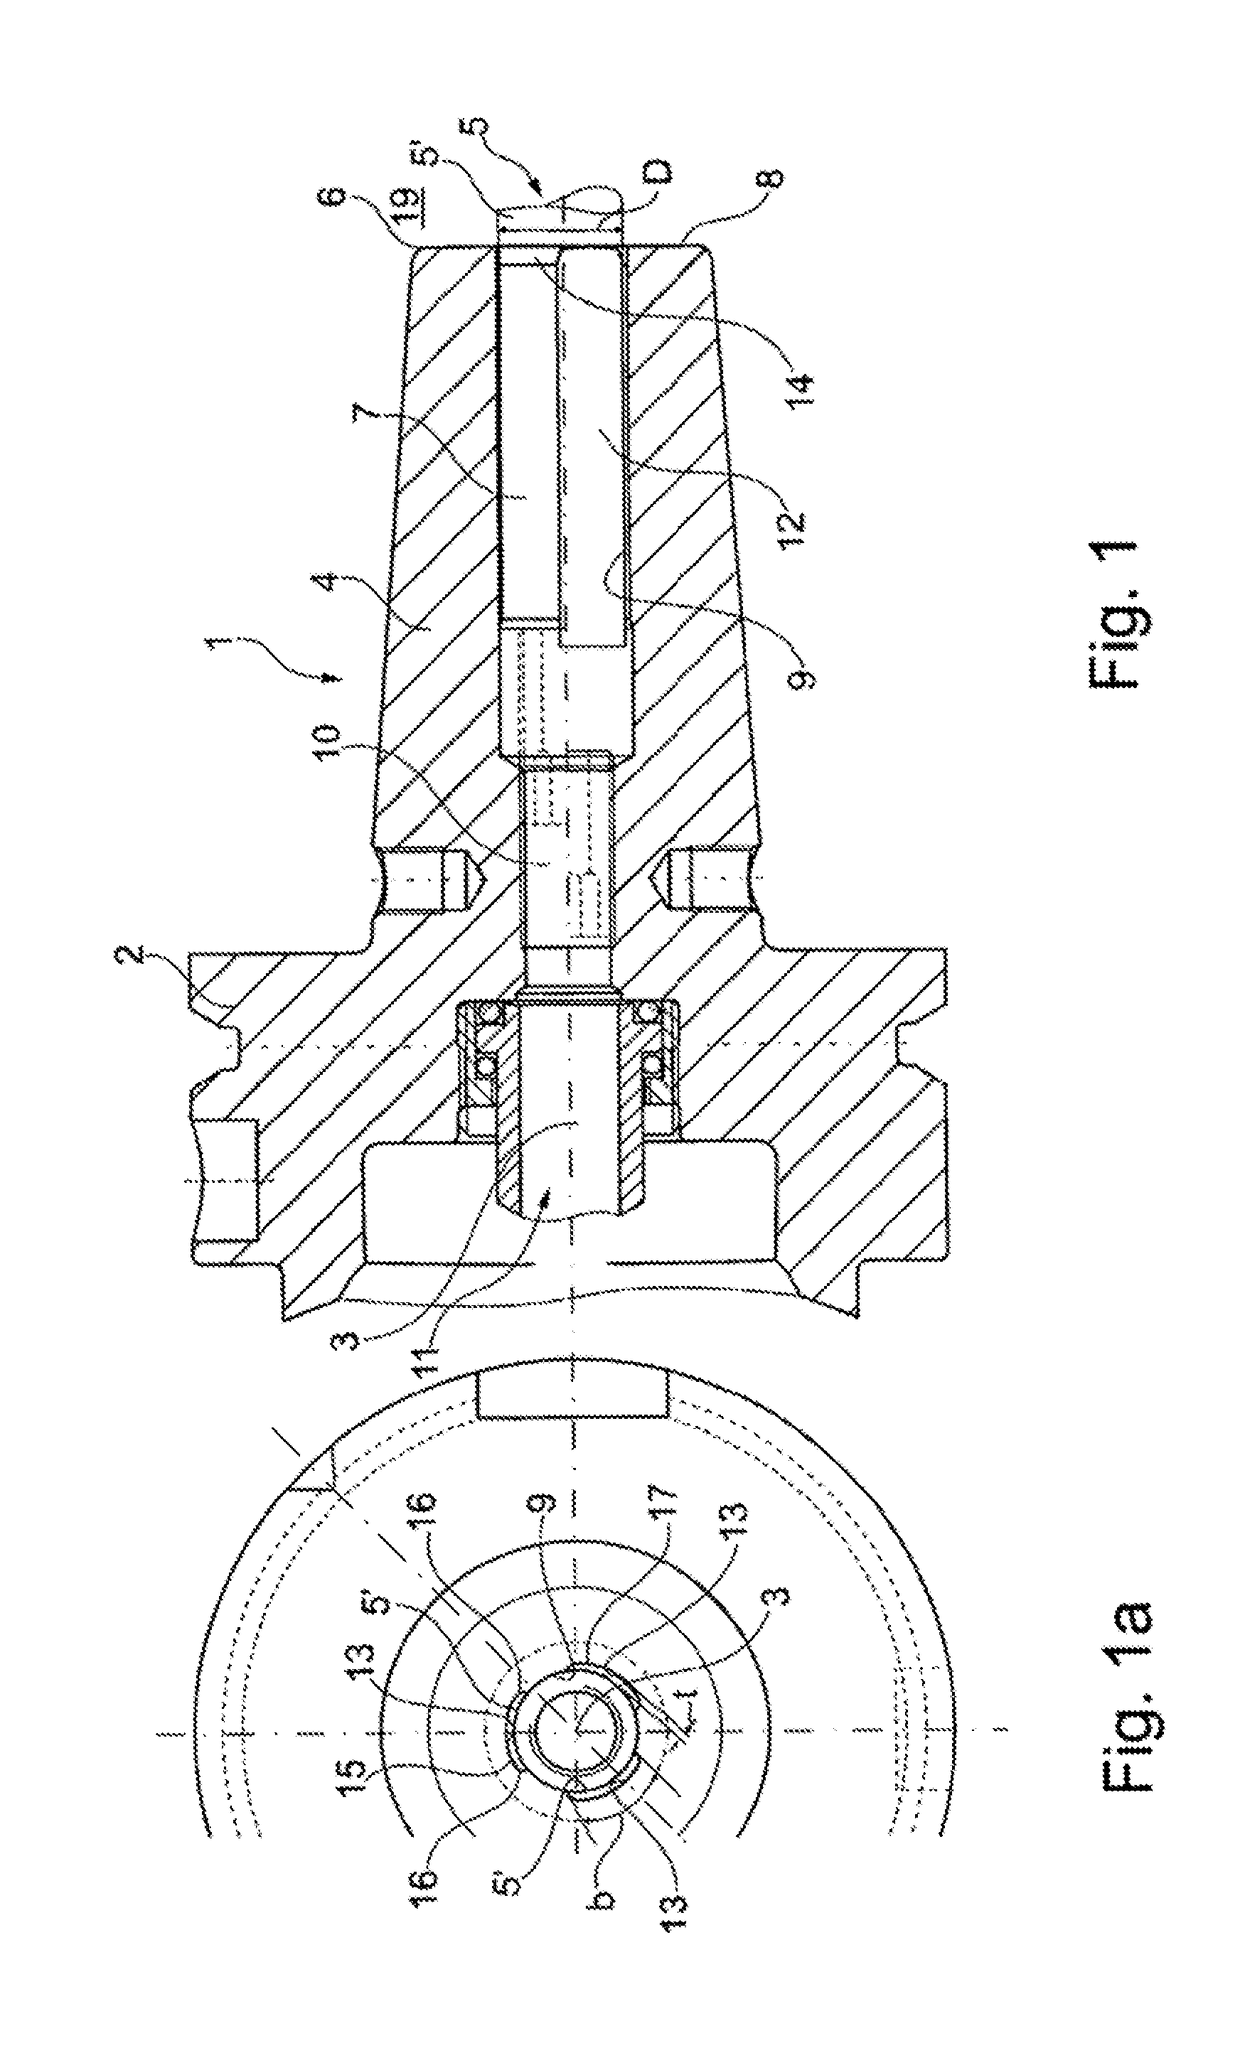 Tool holding device